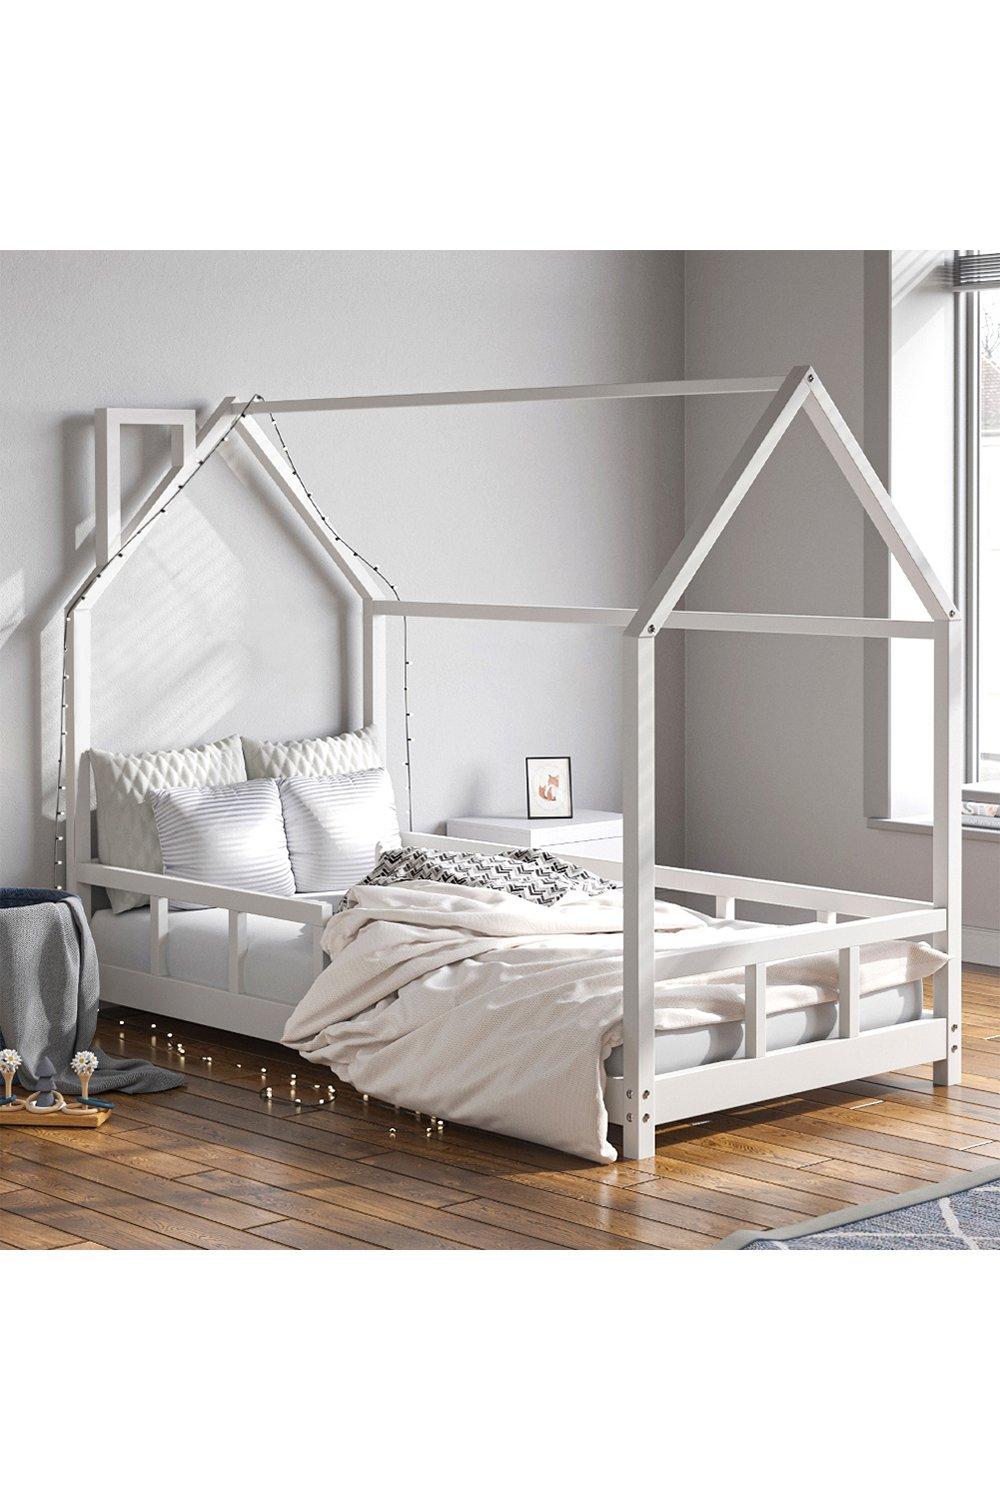 Wooden Kid's Bed with House Frame